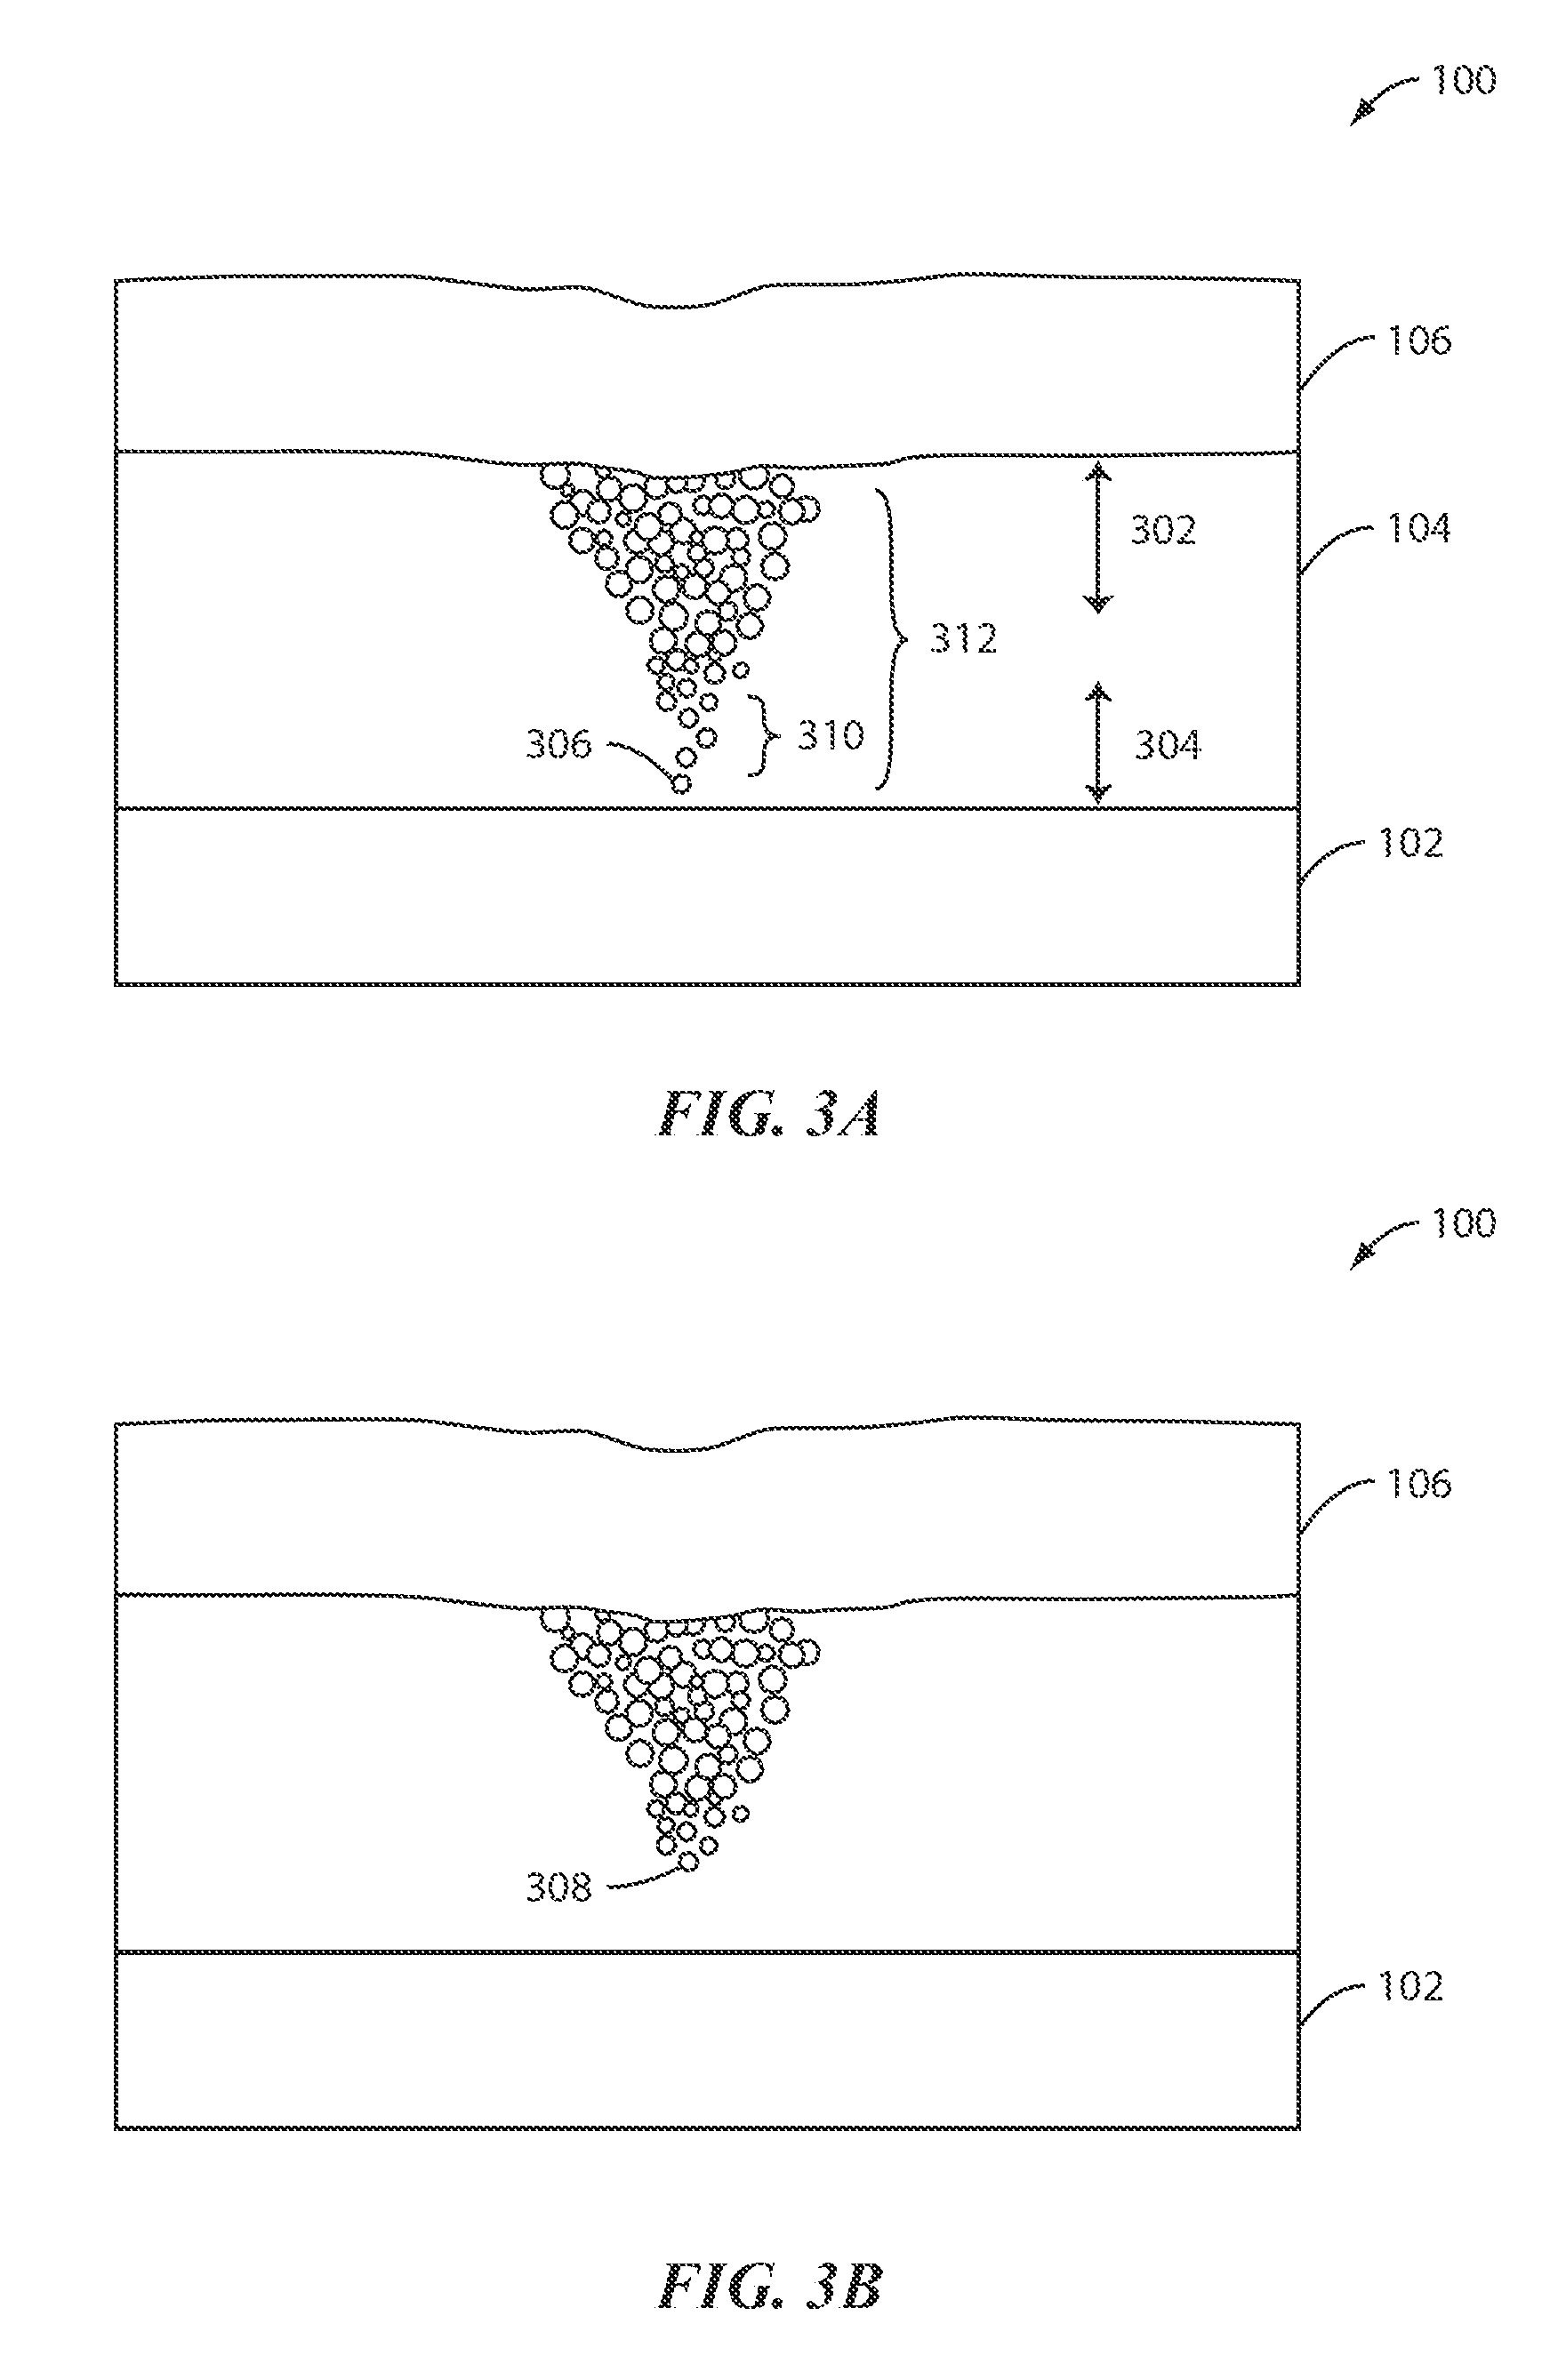 Switching device having a non-linear element